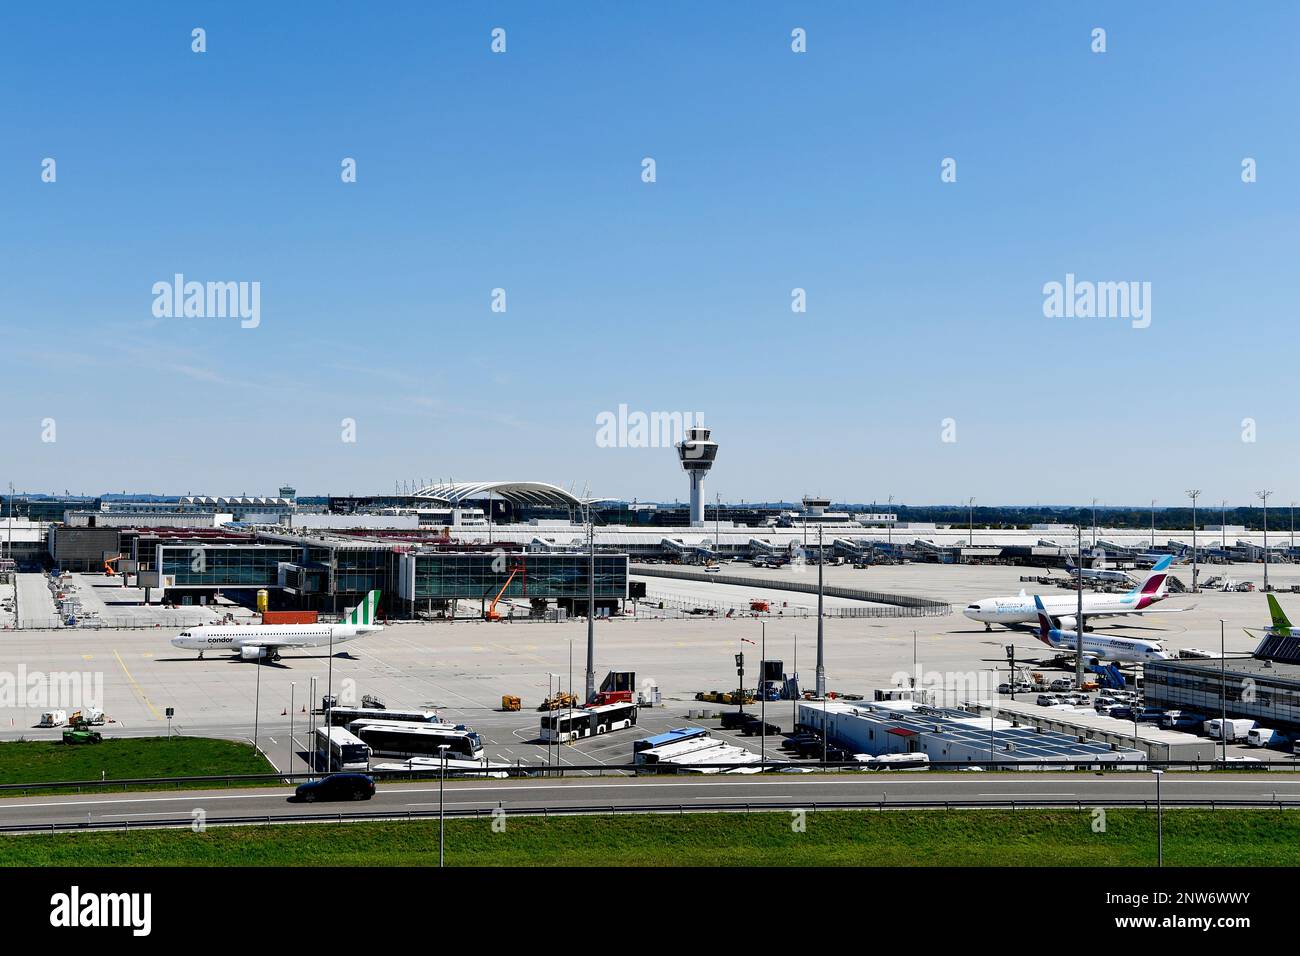 construction site, Pier West, visitorhill, Airfield west, Overview, Panorama, Aircrafts, Traffic, Munich Airport, Airport, Munich, Bavaria, German Stock Photo